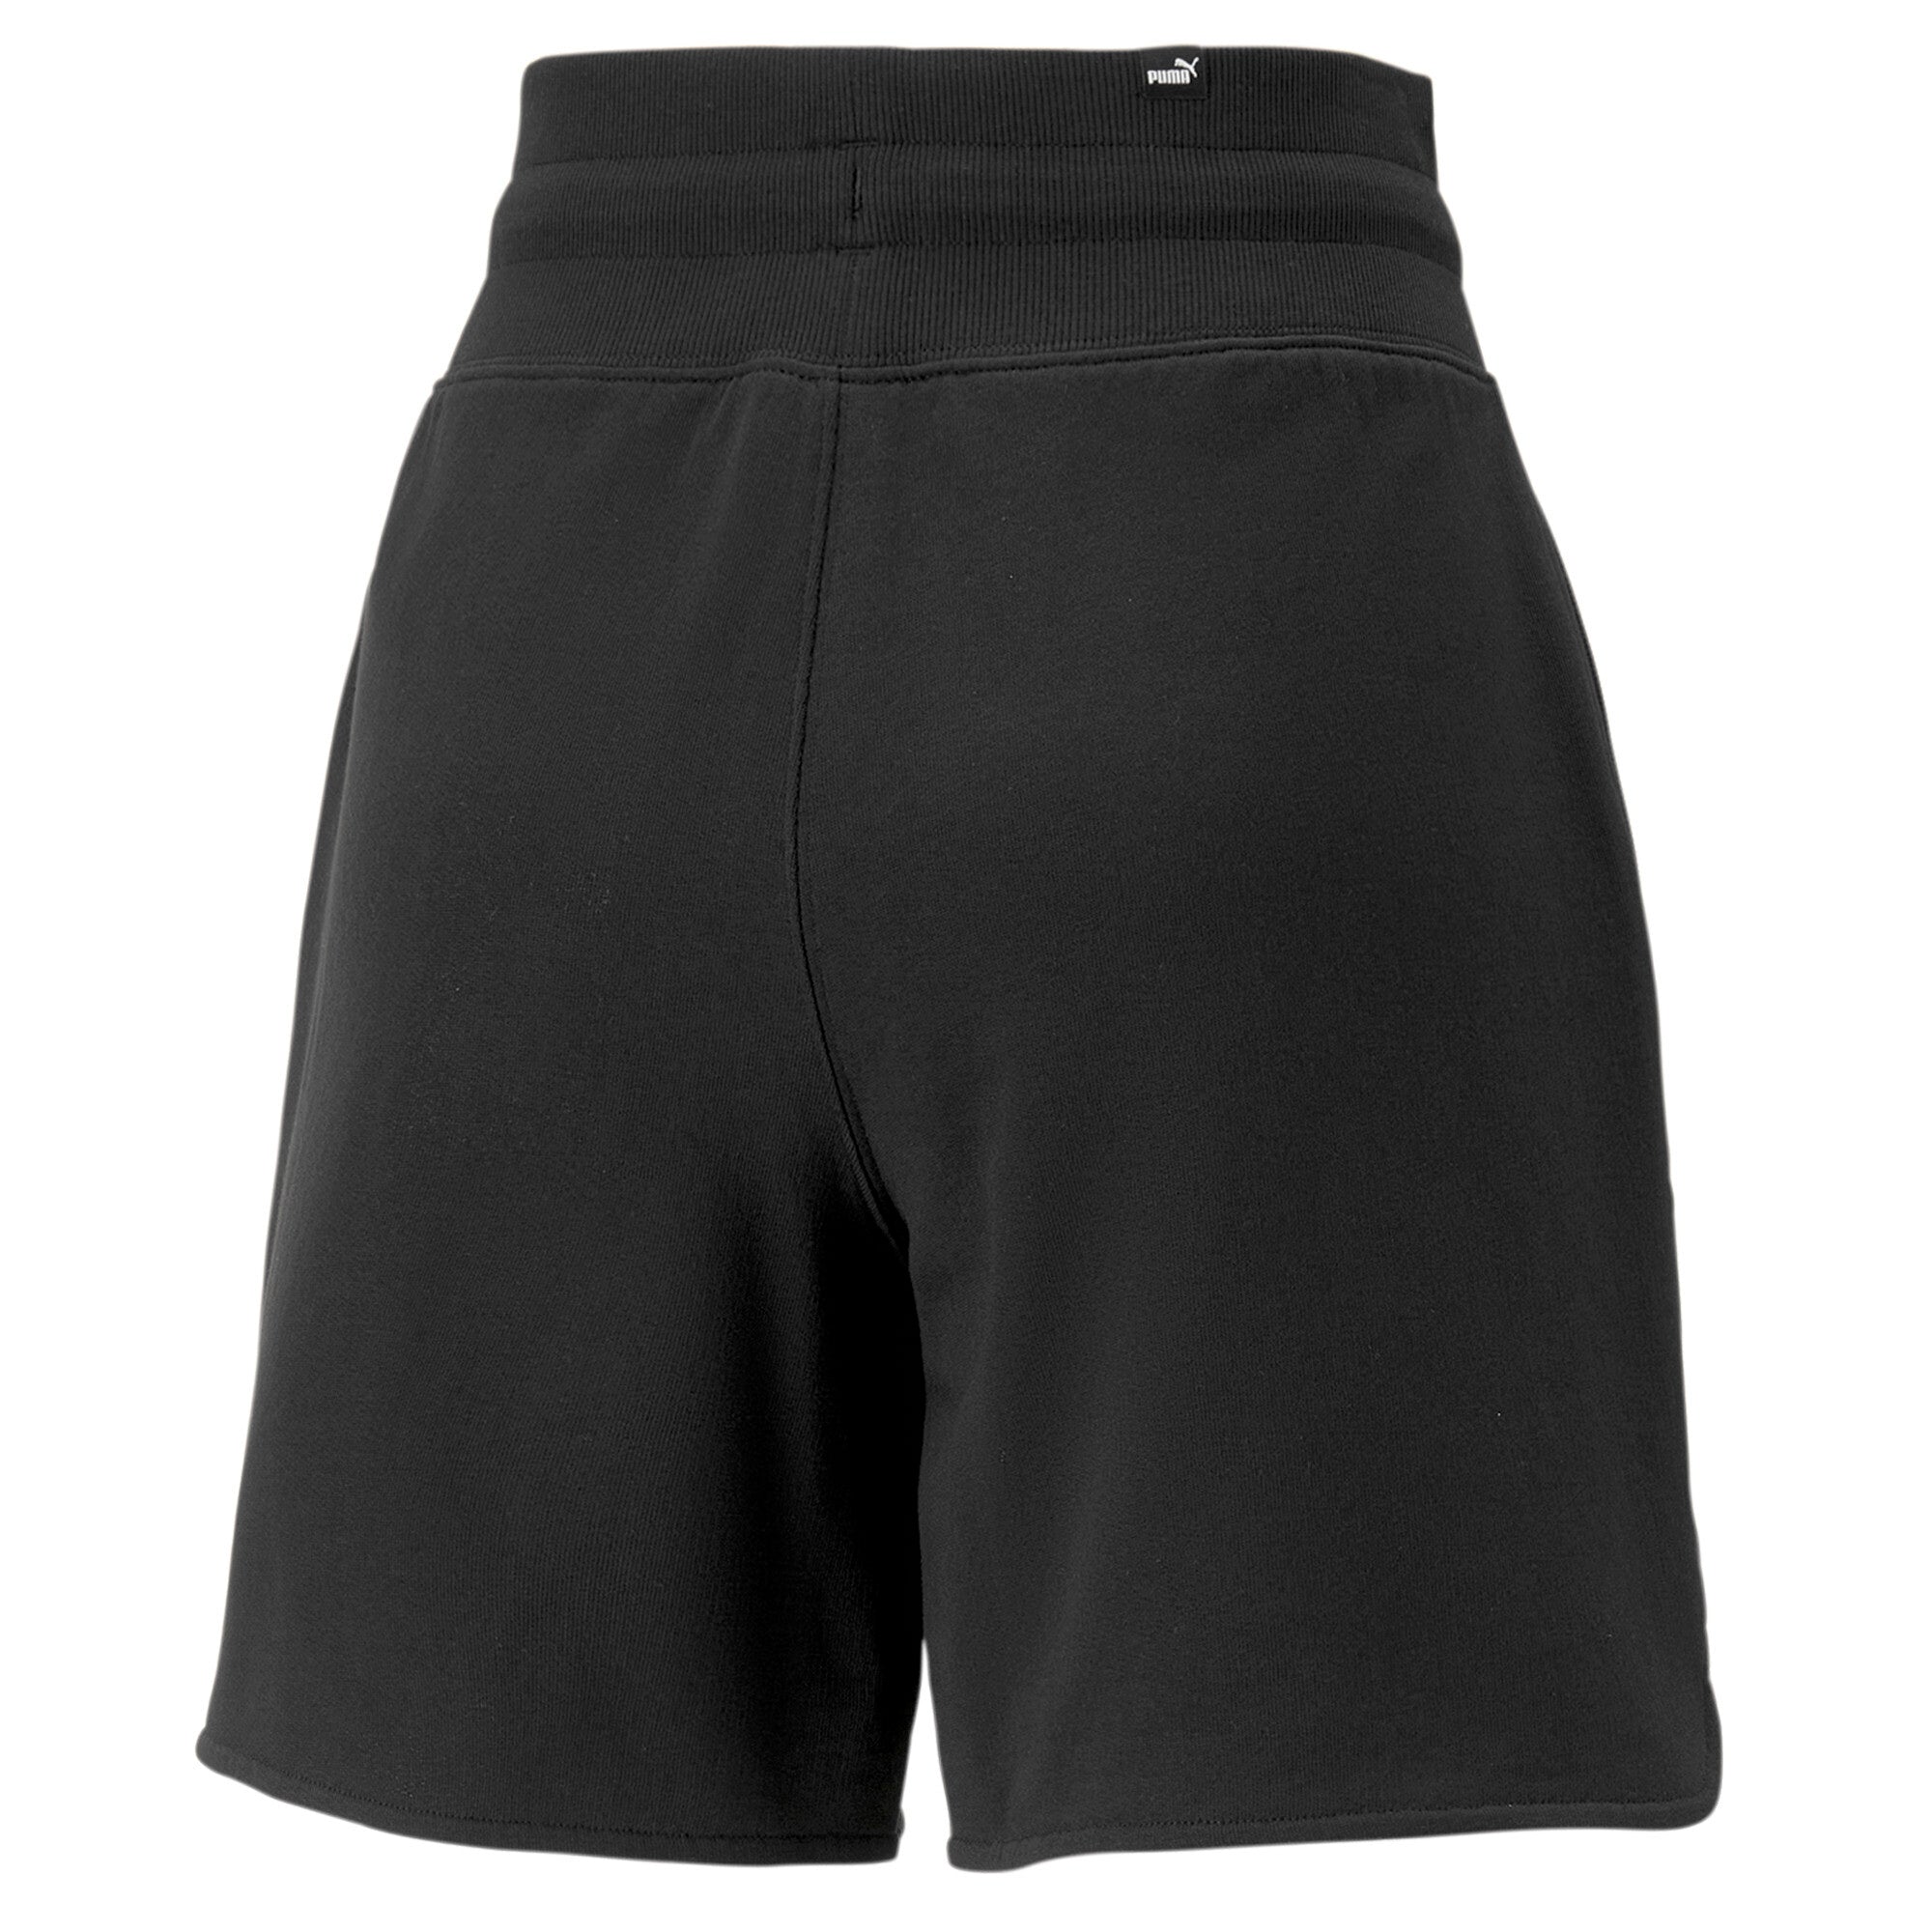 WOMENS HER SHORTS - 67406101